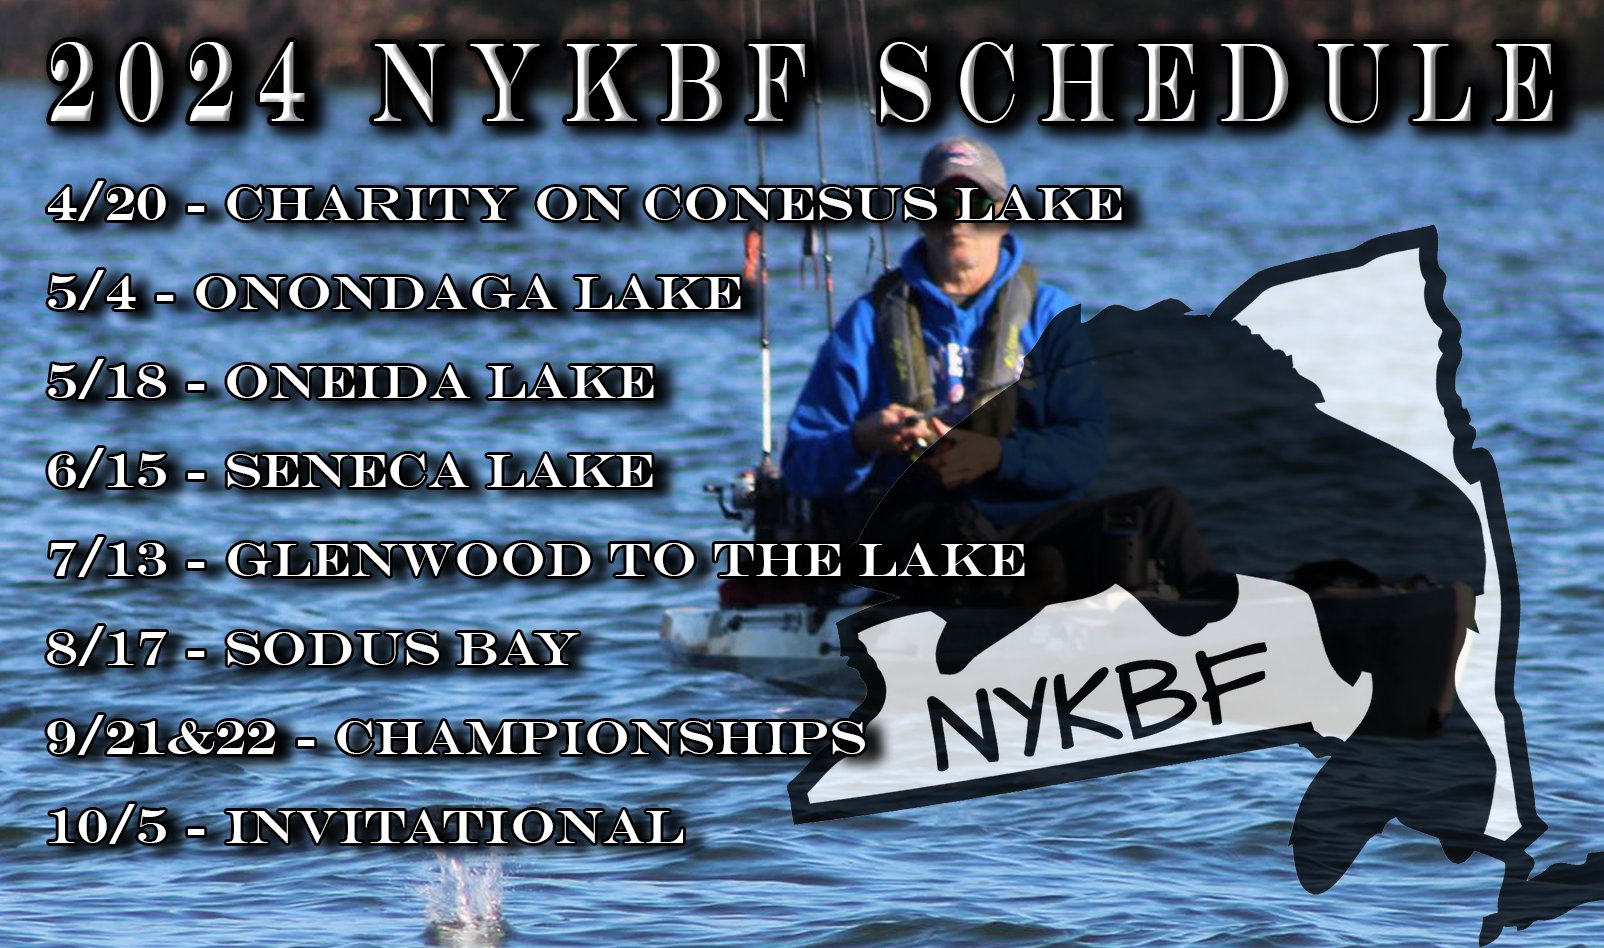 The 2024 schedule for NYKBF